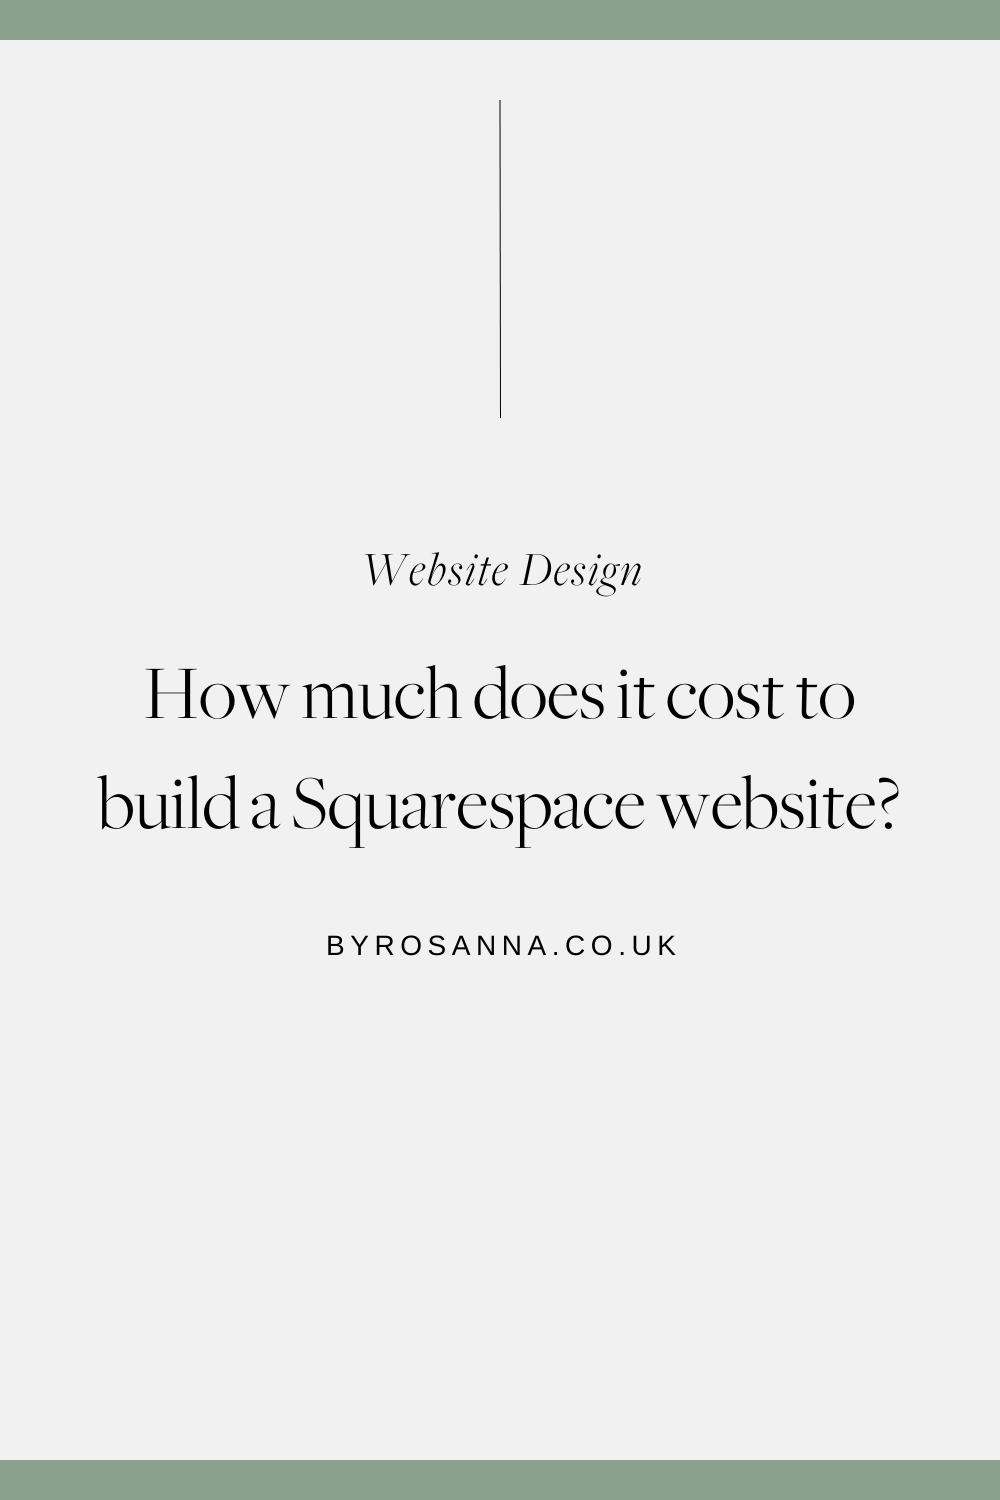 How To Design Website On Squarespace